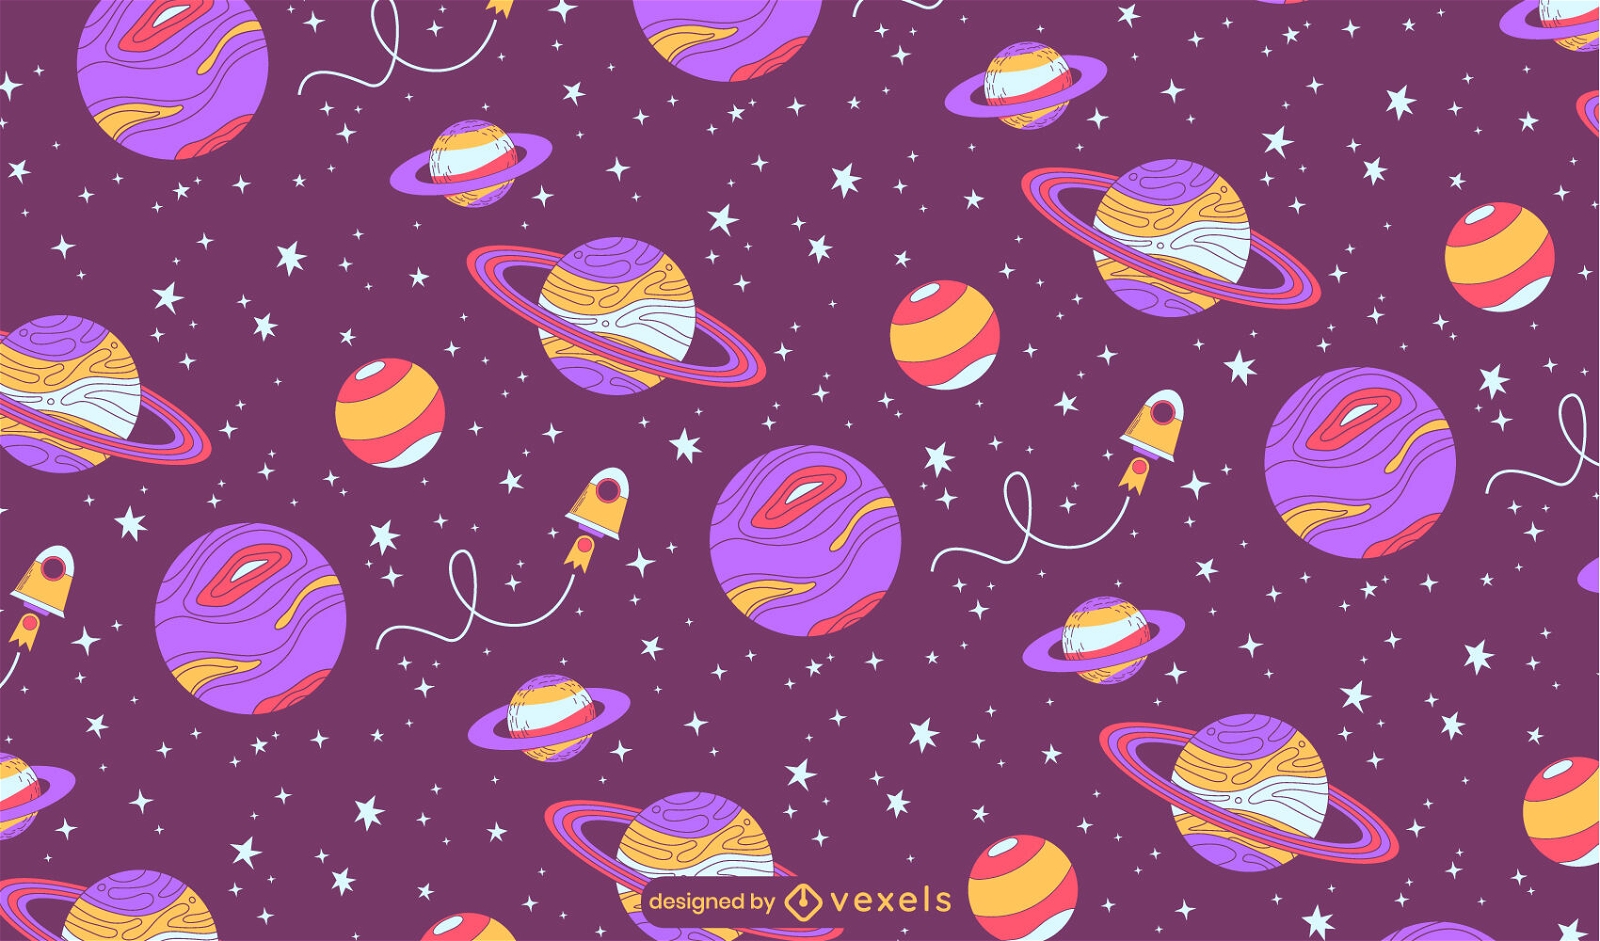 Planets and spaceship in space pattern design